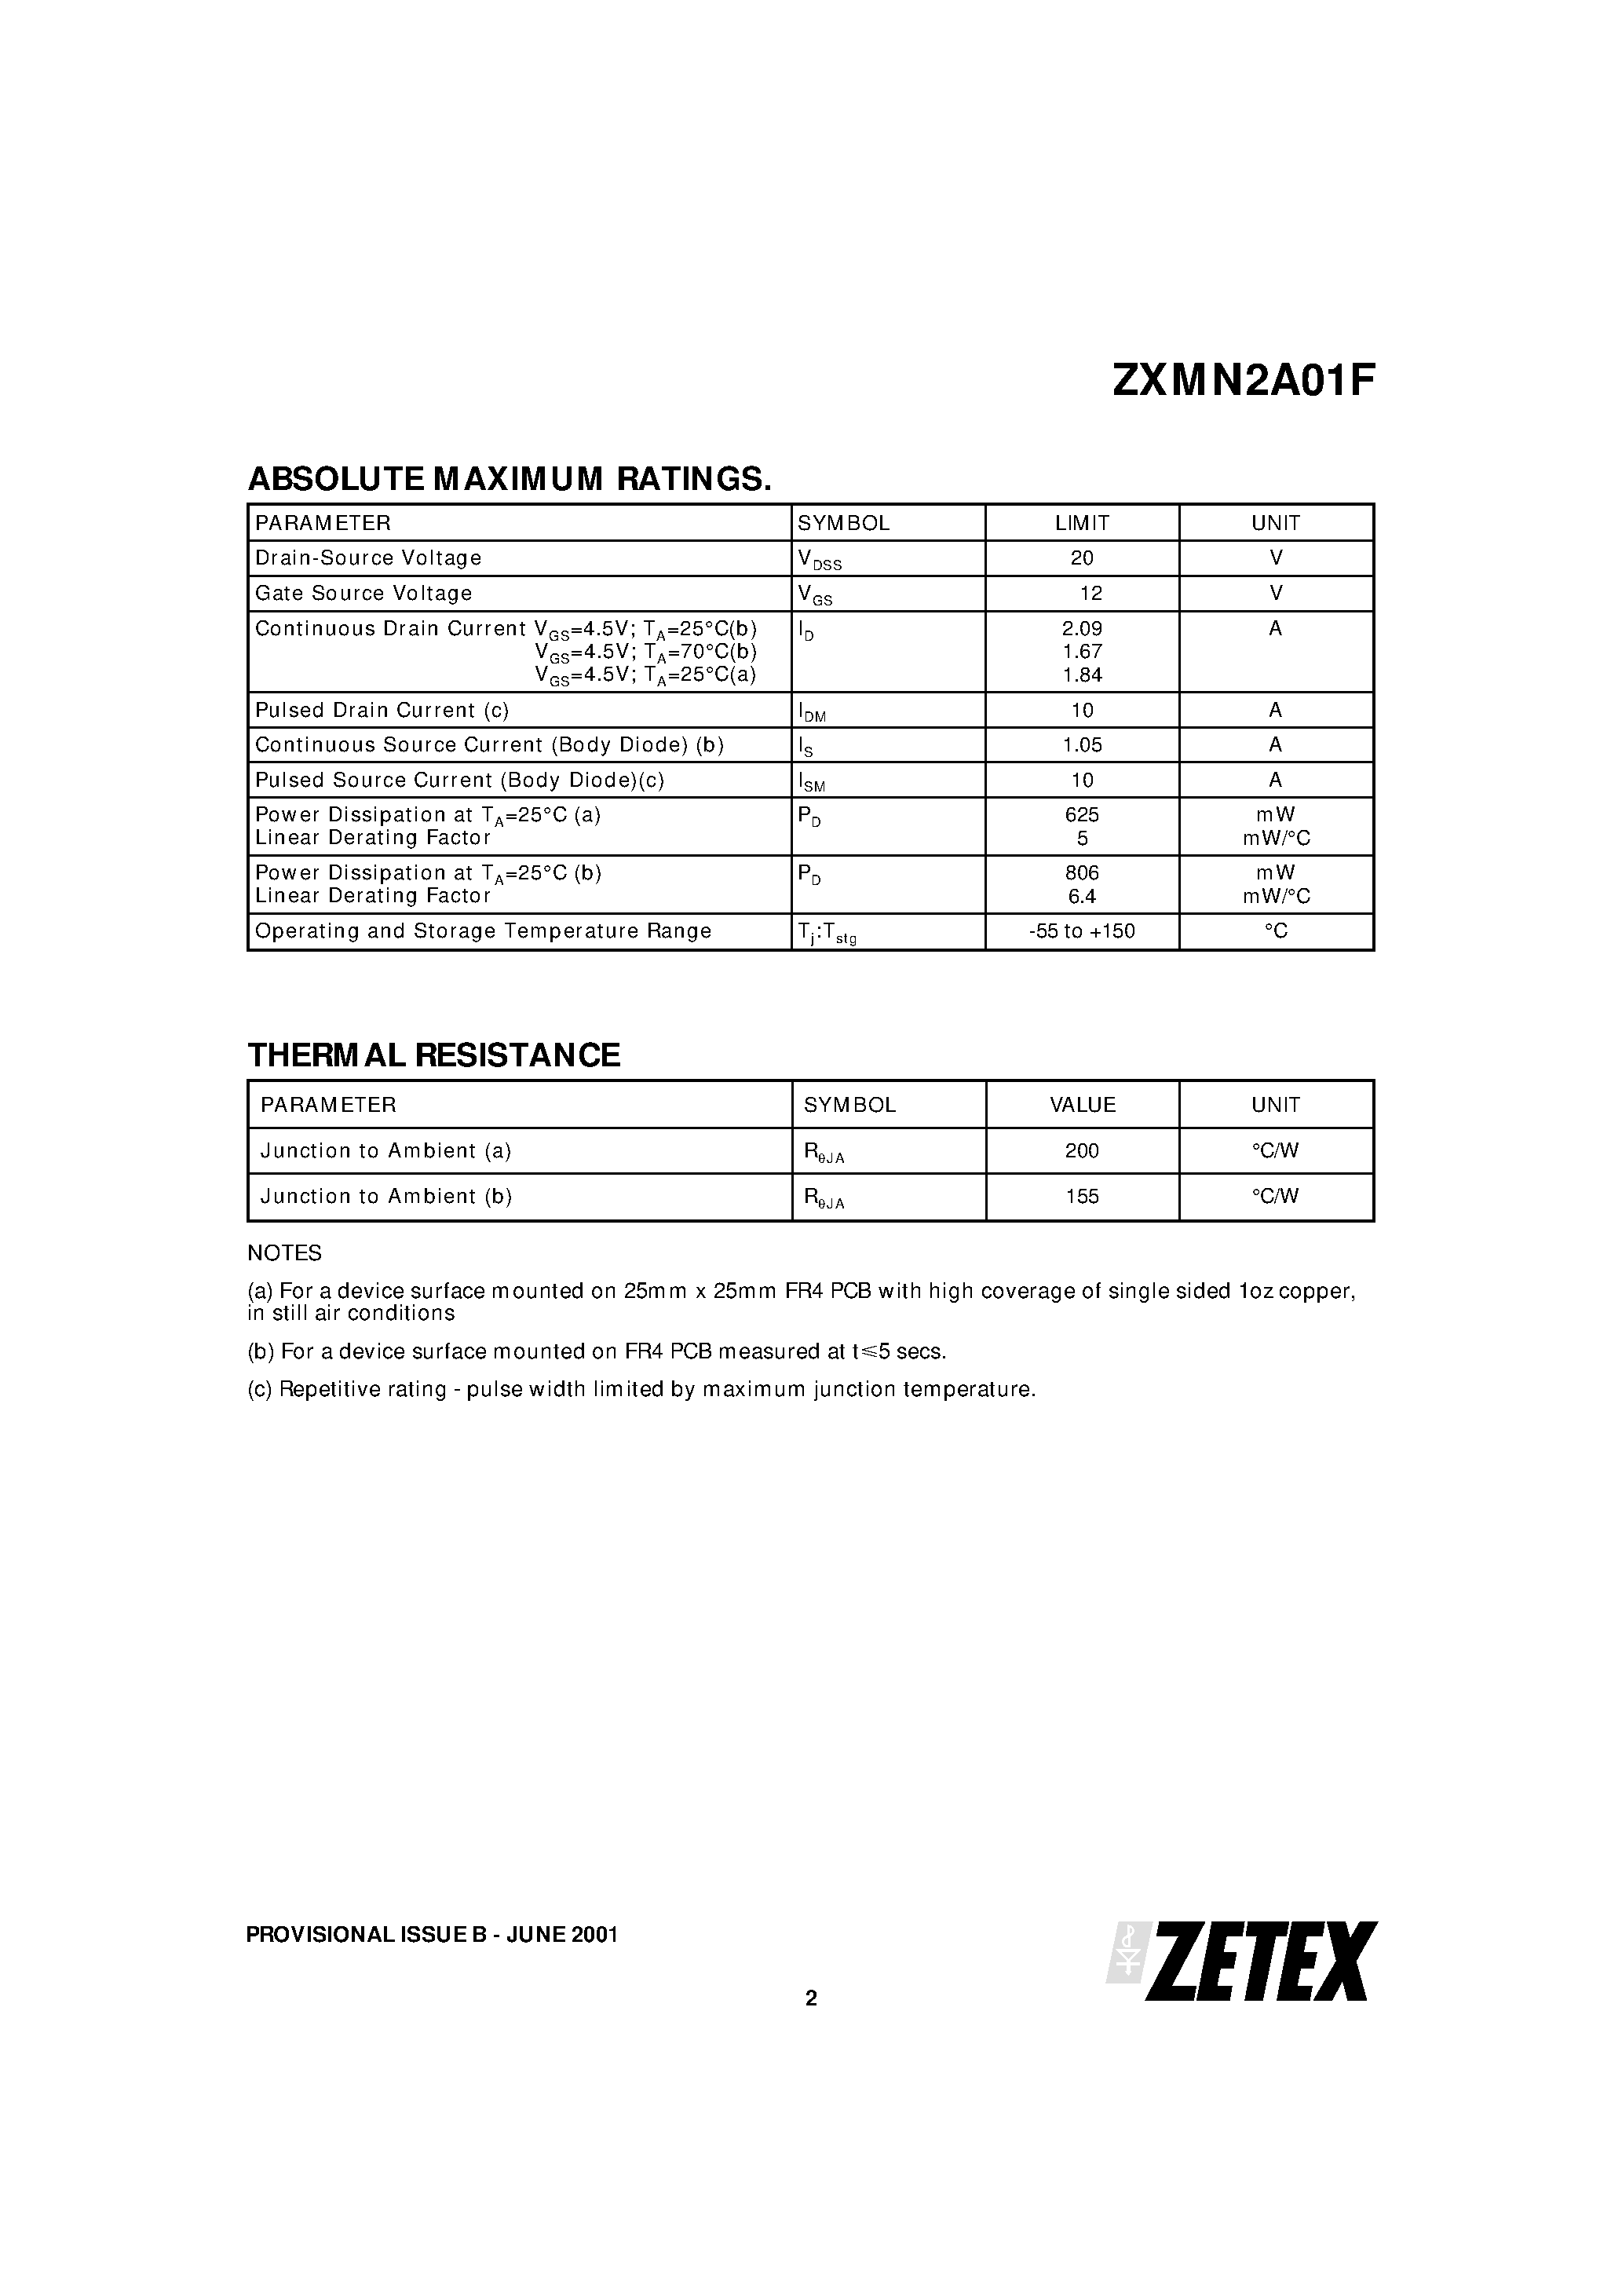 Datasheet ZXMN2A01F - 20V N-CHANNEL ENHANCEMENT MODE MOSFET page 2